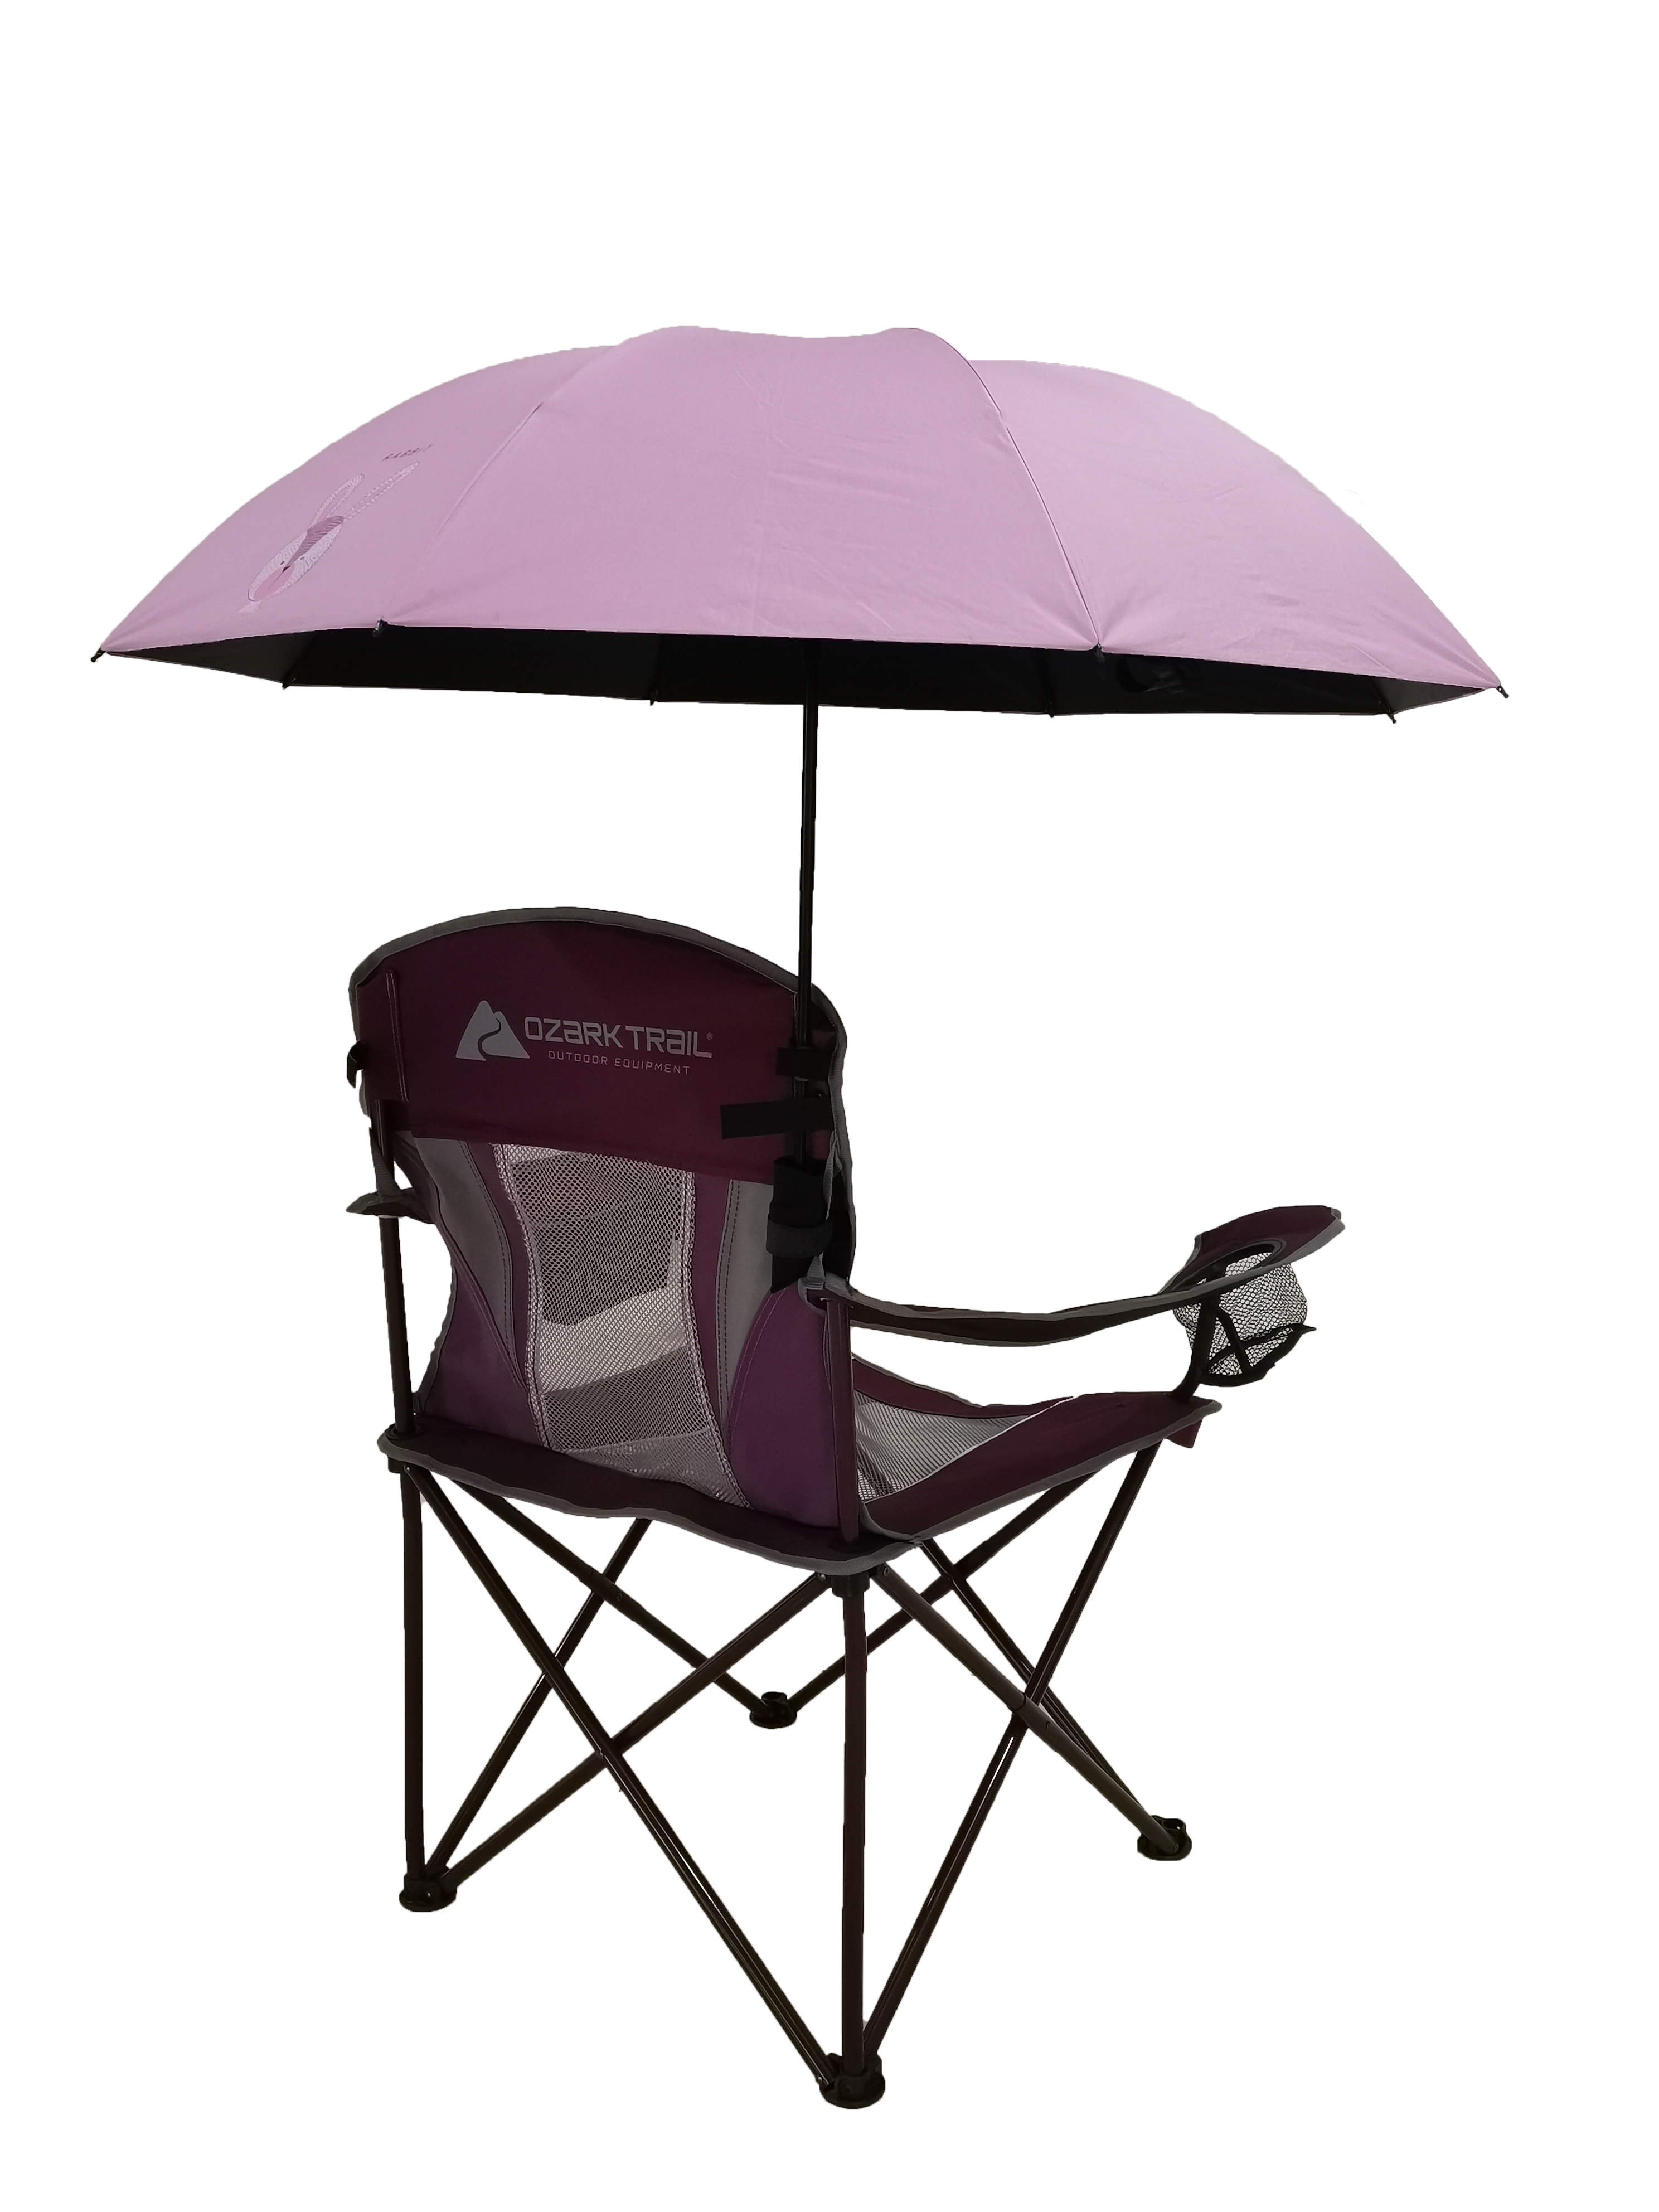 Ozark Trail Oversized Mesh Chair with Cooler, Purple, Adult - image 6 of 9